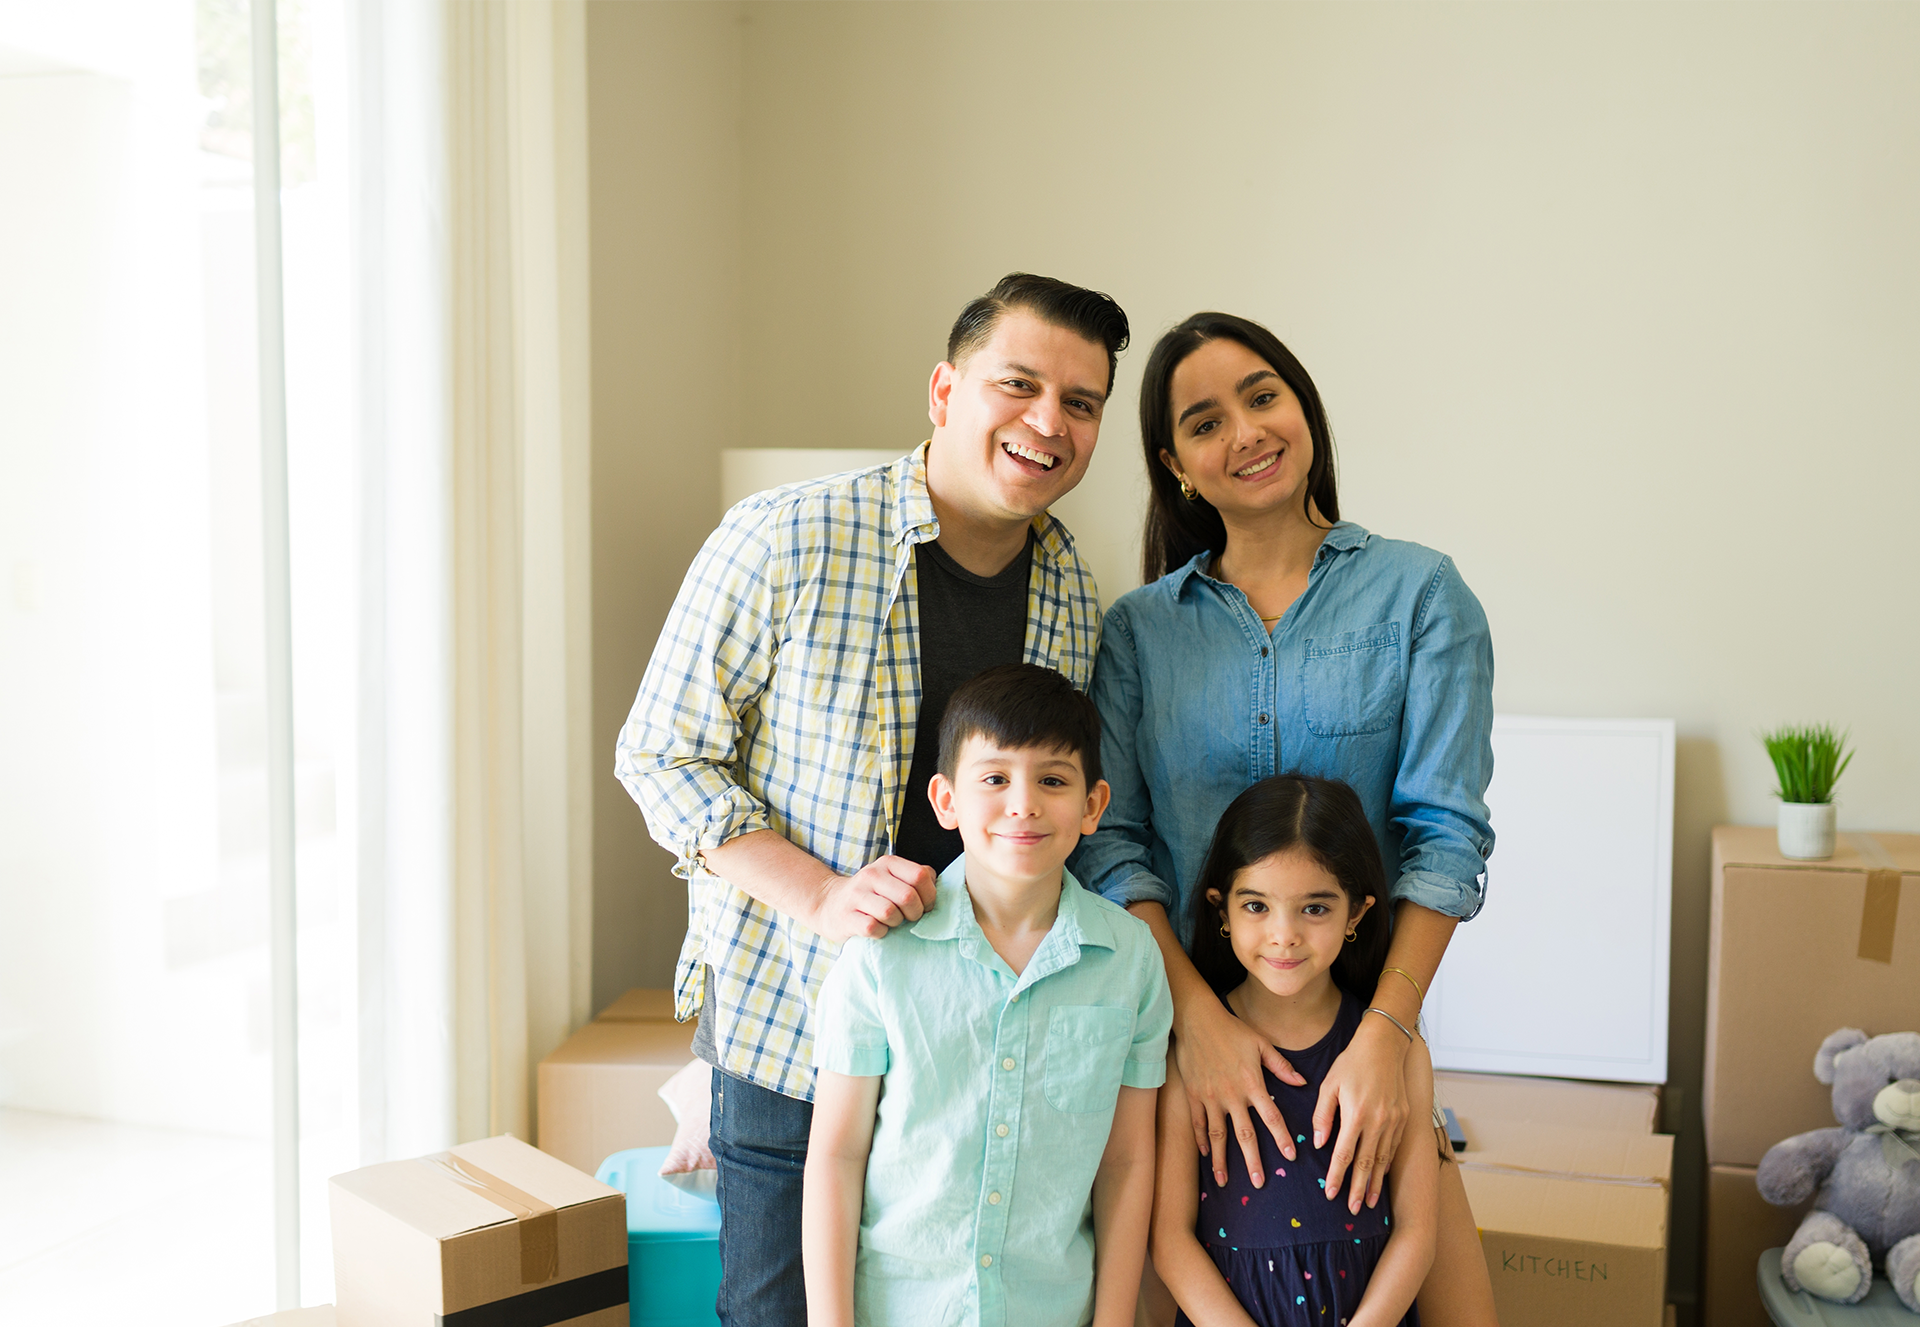 Happy Hispanic couple with two kids smiling in new home with moving boxes on floor in background.